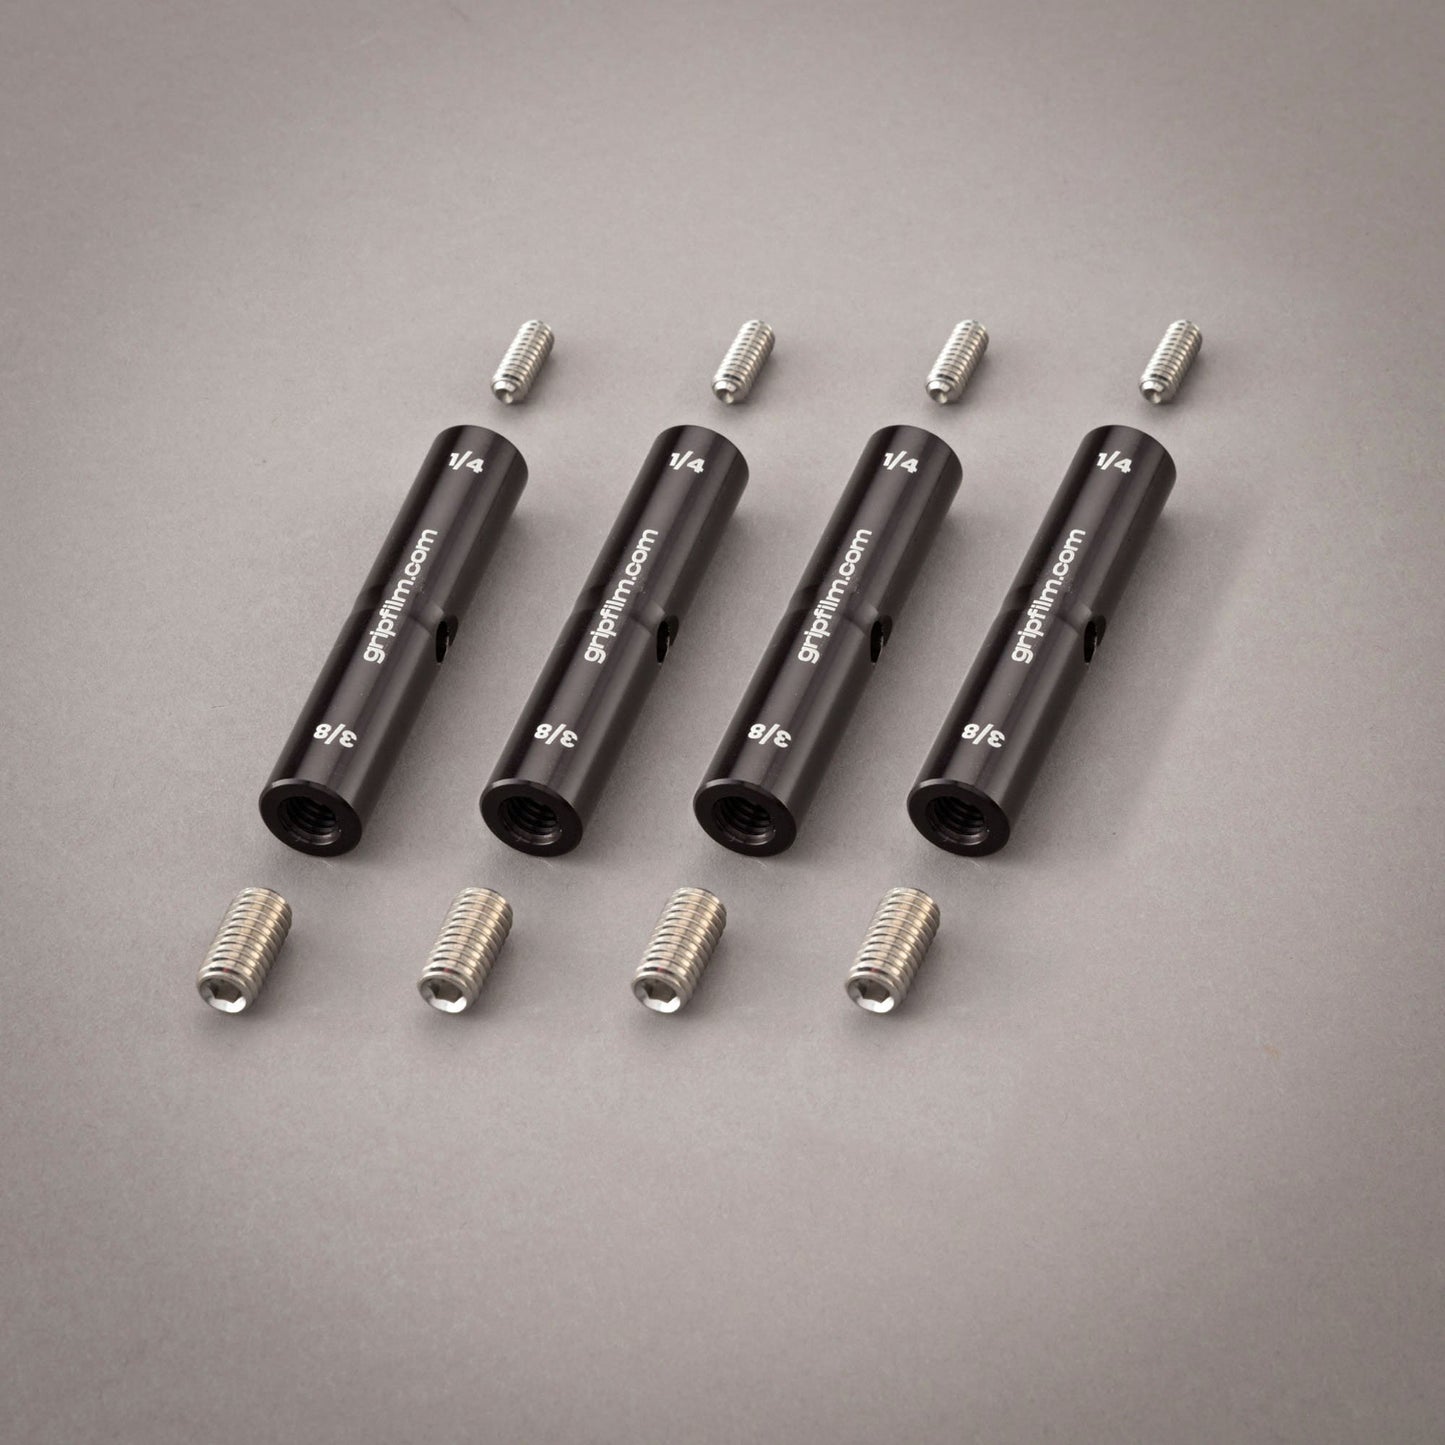 5/8" STARTER PIN SET with 1/4" - 3/8" Female Threads